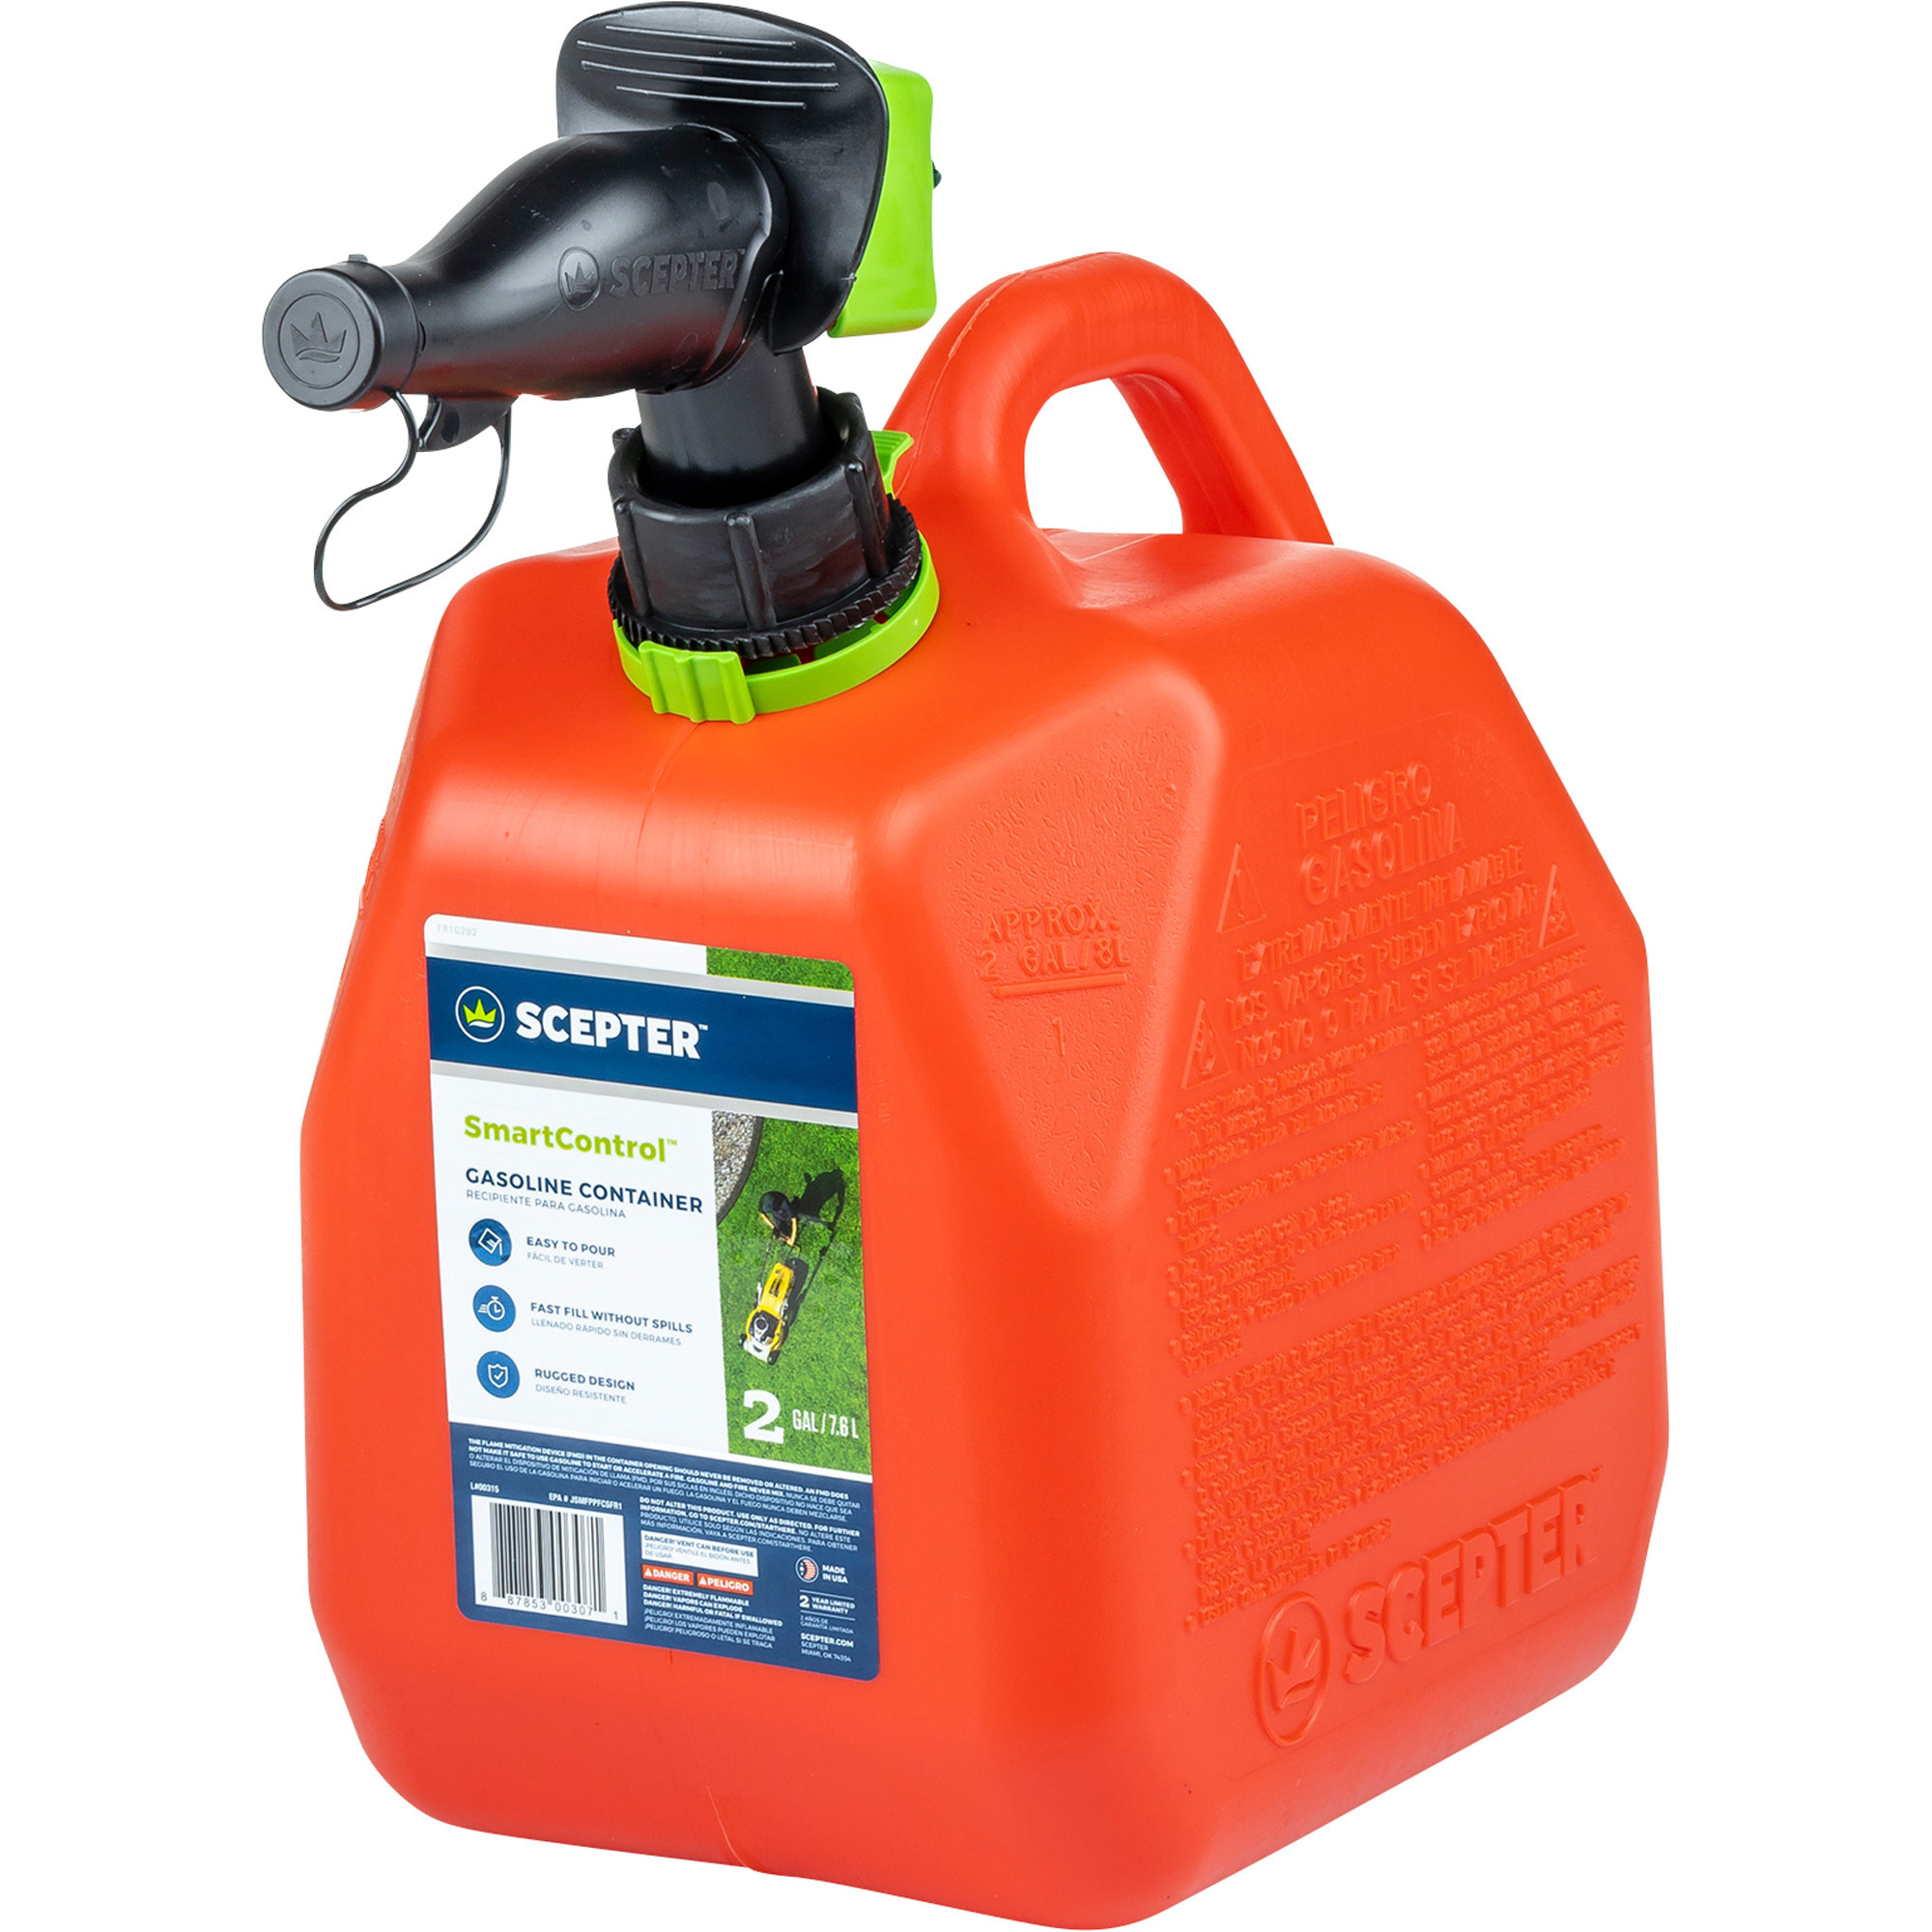 Scepter Smart Control Gasoline Fuel Can, 2-Gallon, Red, Model FR1G201